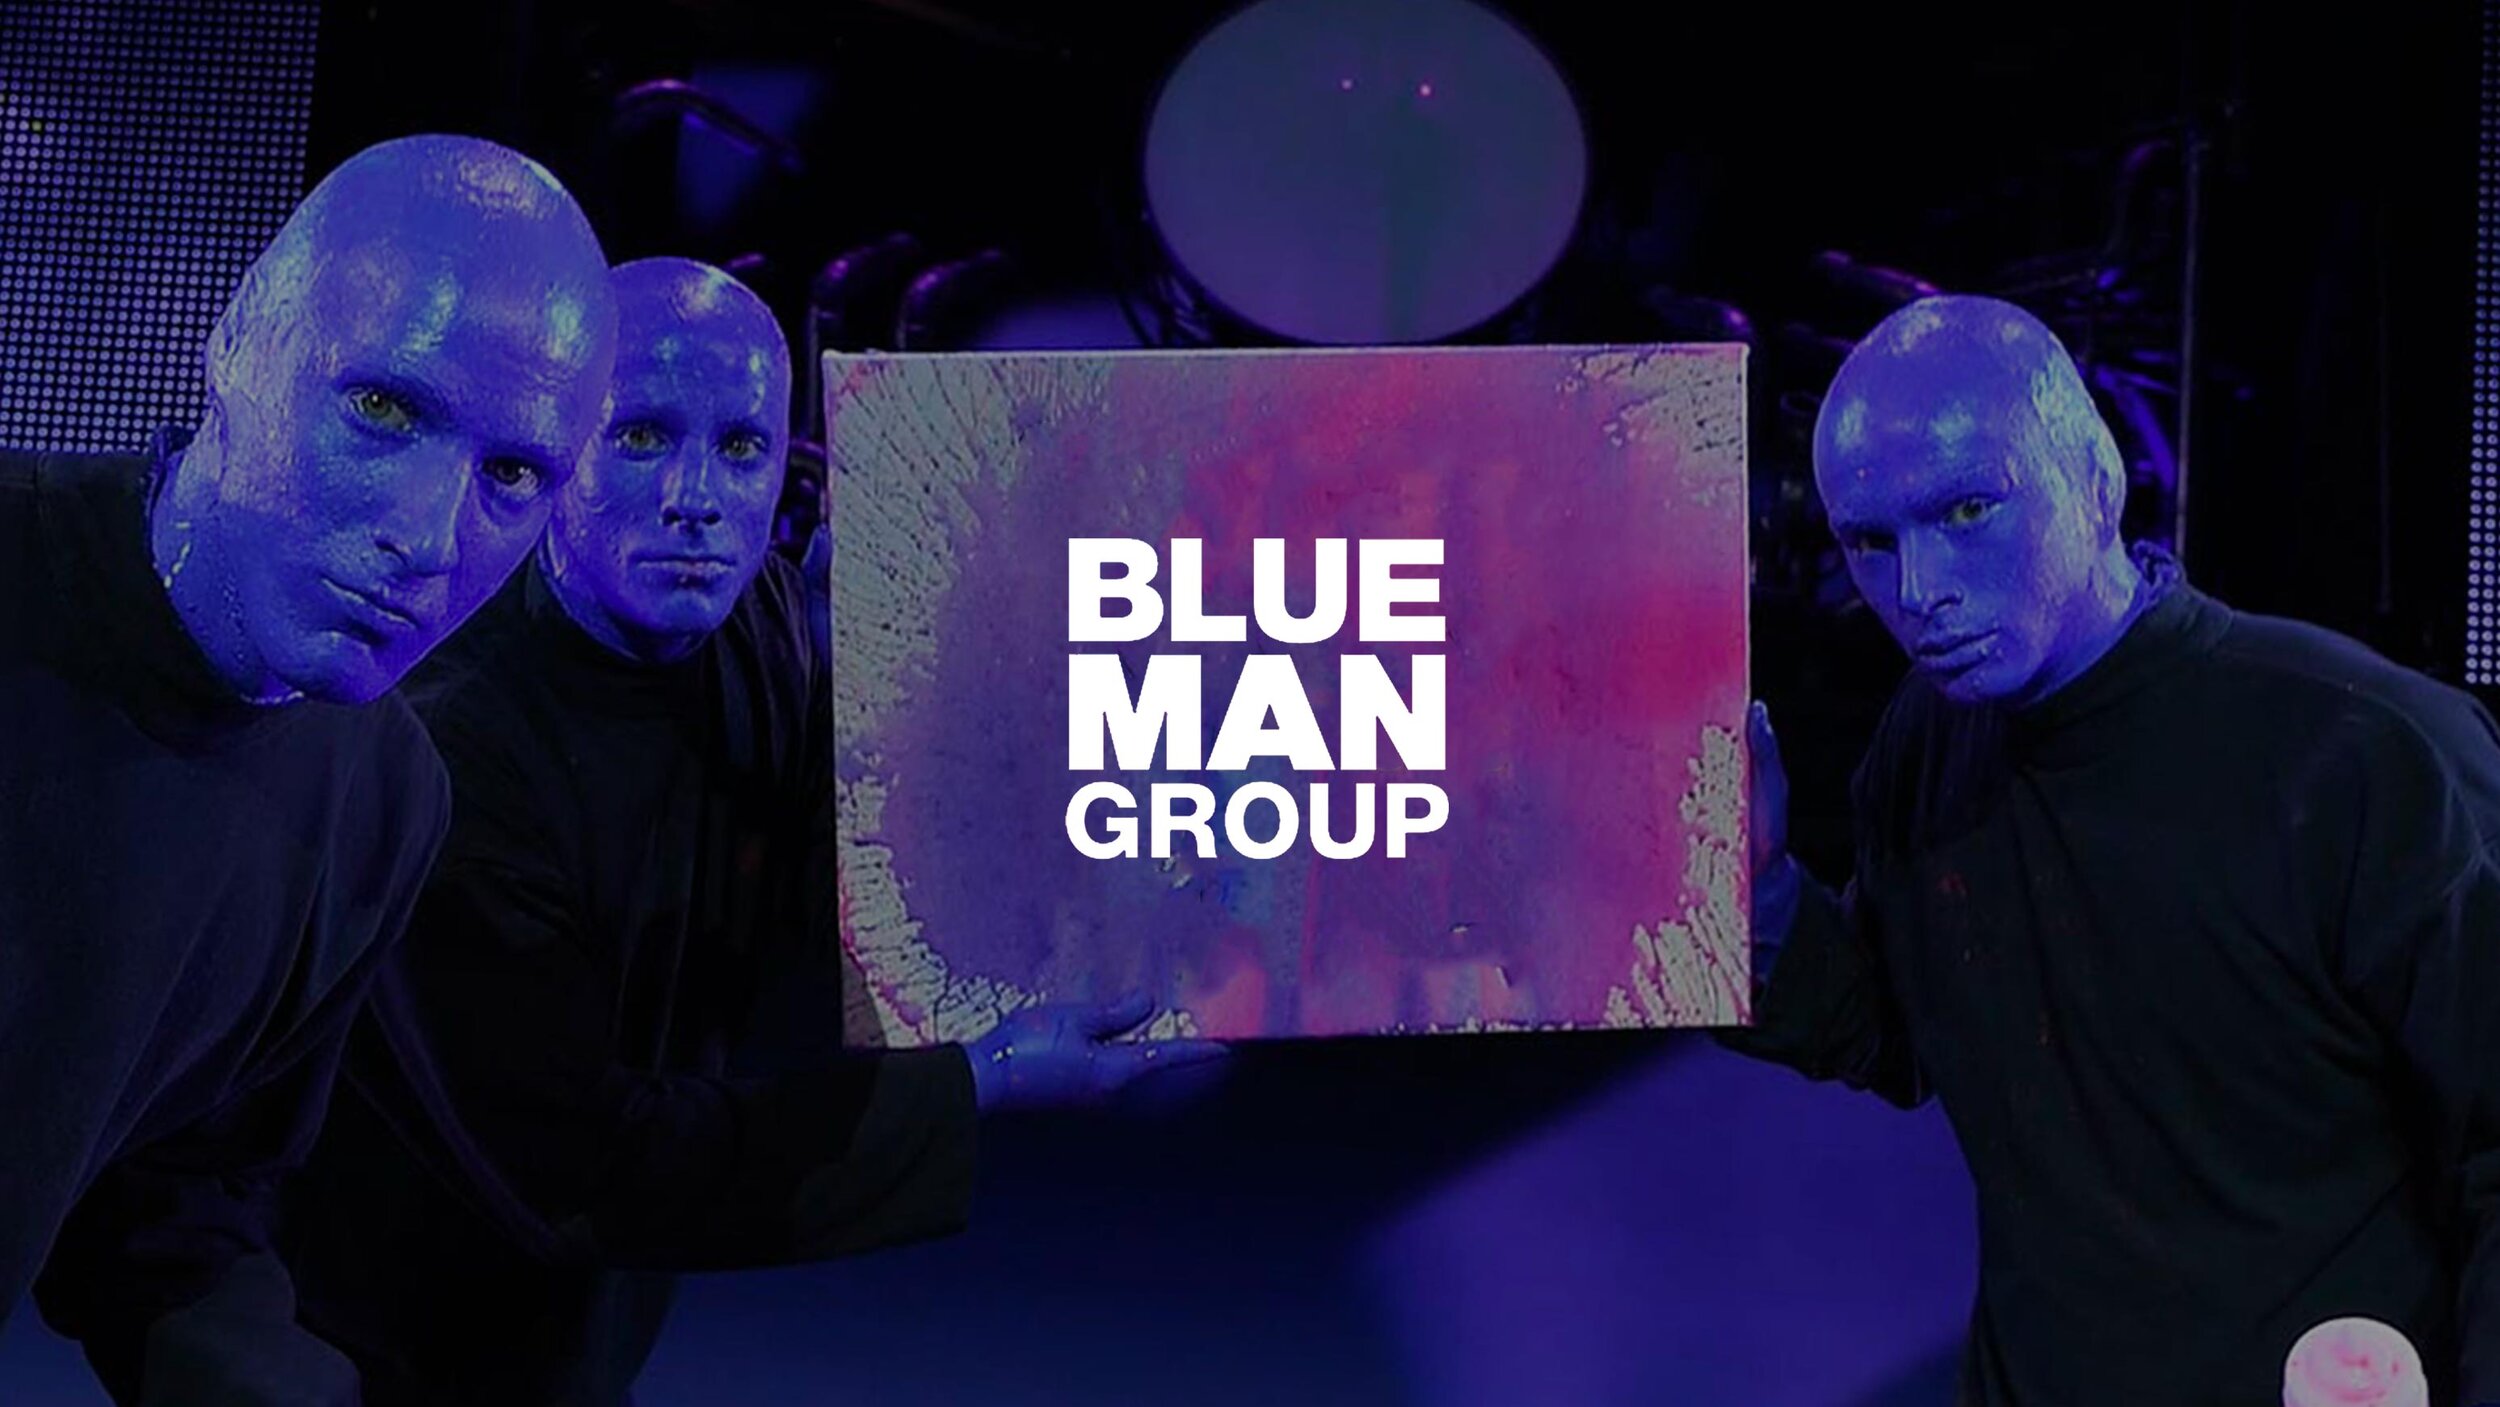 "I didn't know the Blue Man Group was hiring." - wide 4